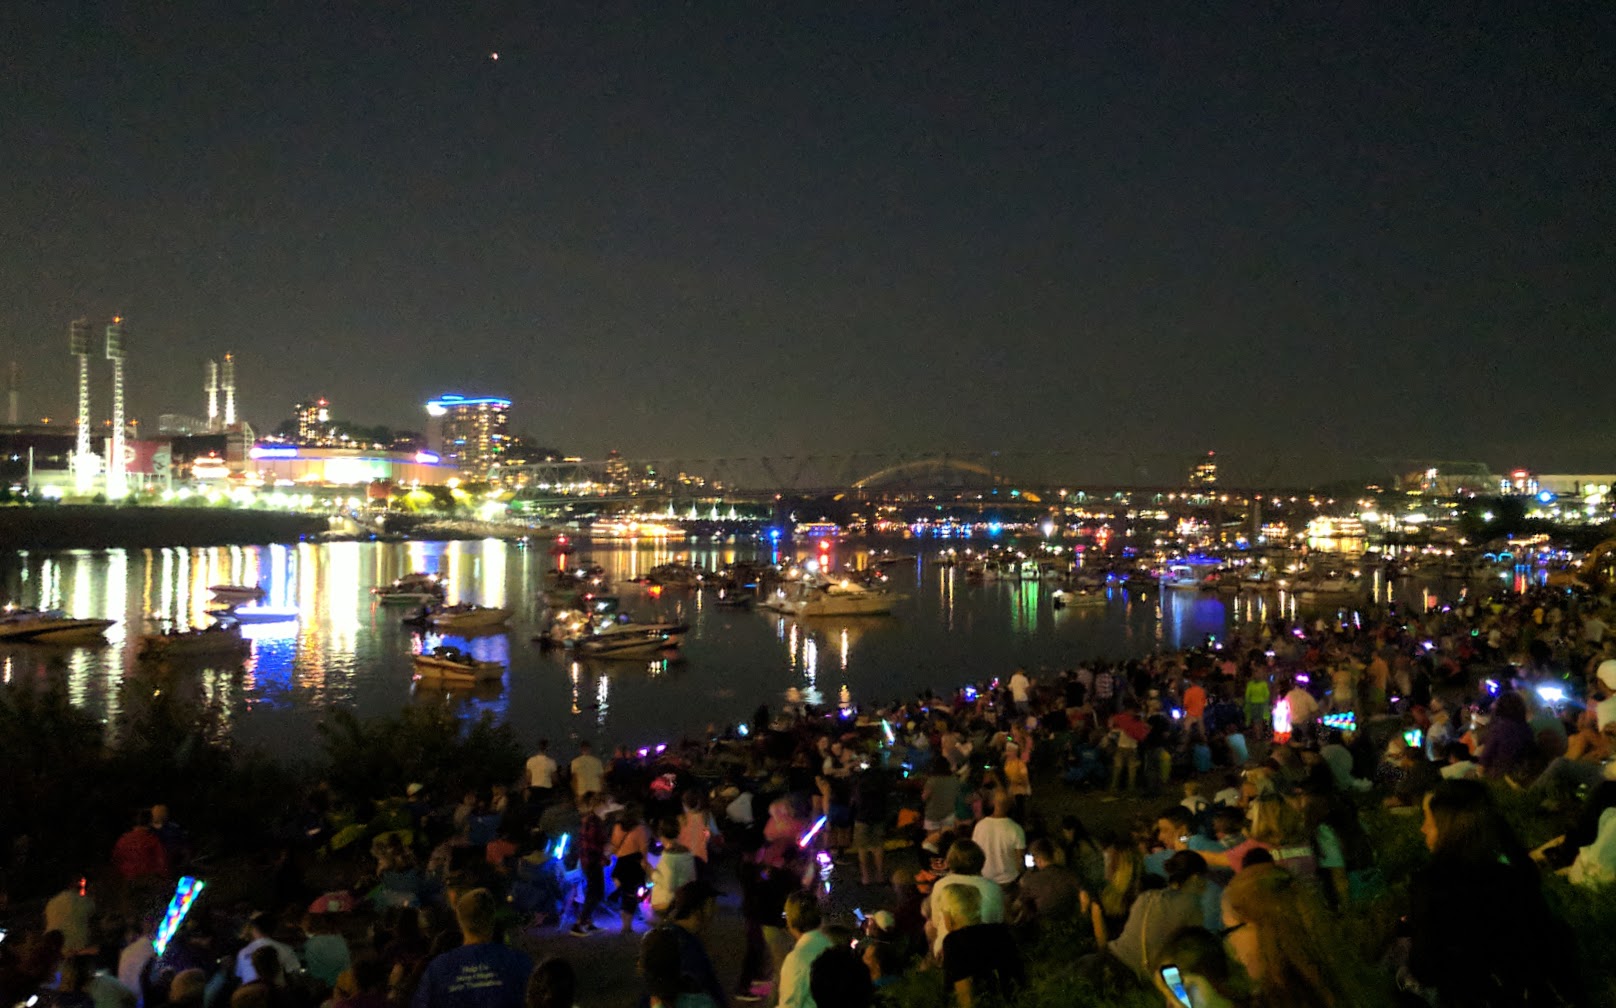 A crowd of people in the dark, sitting on the banks of the Ohio river at Riverfest